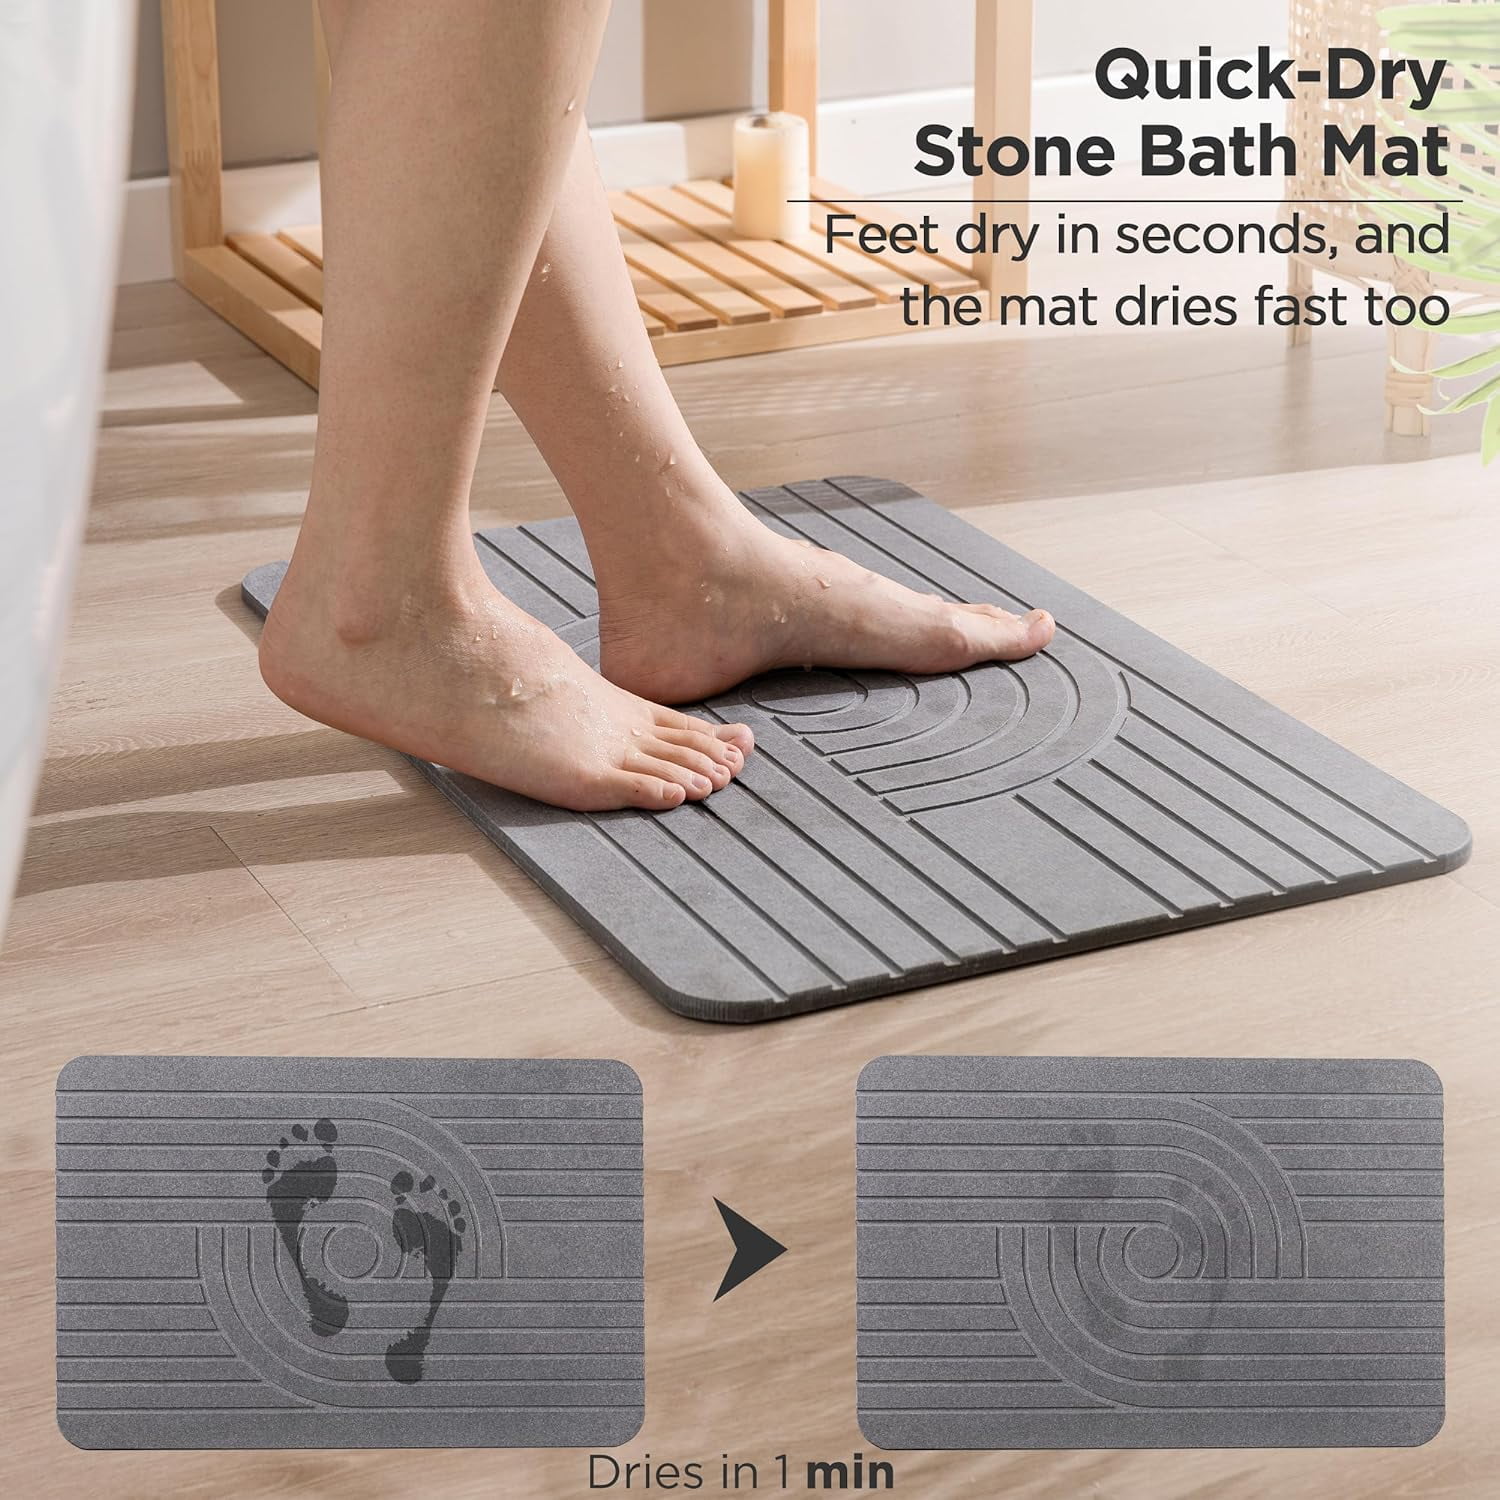 Kooteta Stone Bath Mat, natural diatomaceous earth bath mat, anti slip  super absorbent quick drying bathroom floor mat, stone shower mat, 23.6  x15.3 inches, Suitable for Bathroom, Shower Floor, and Kitchen Counter,wavy